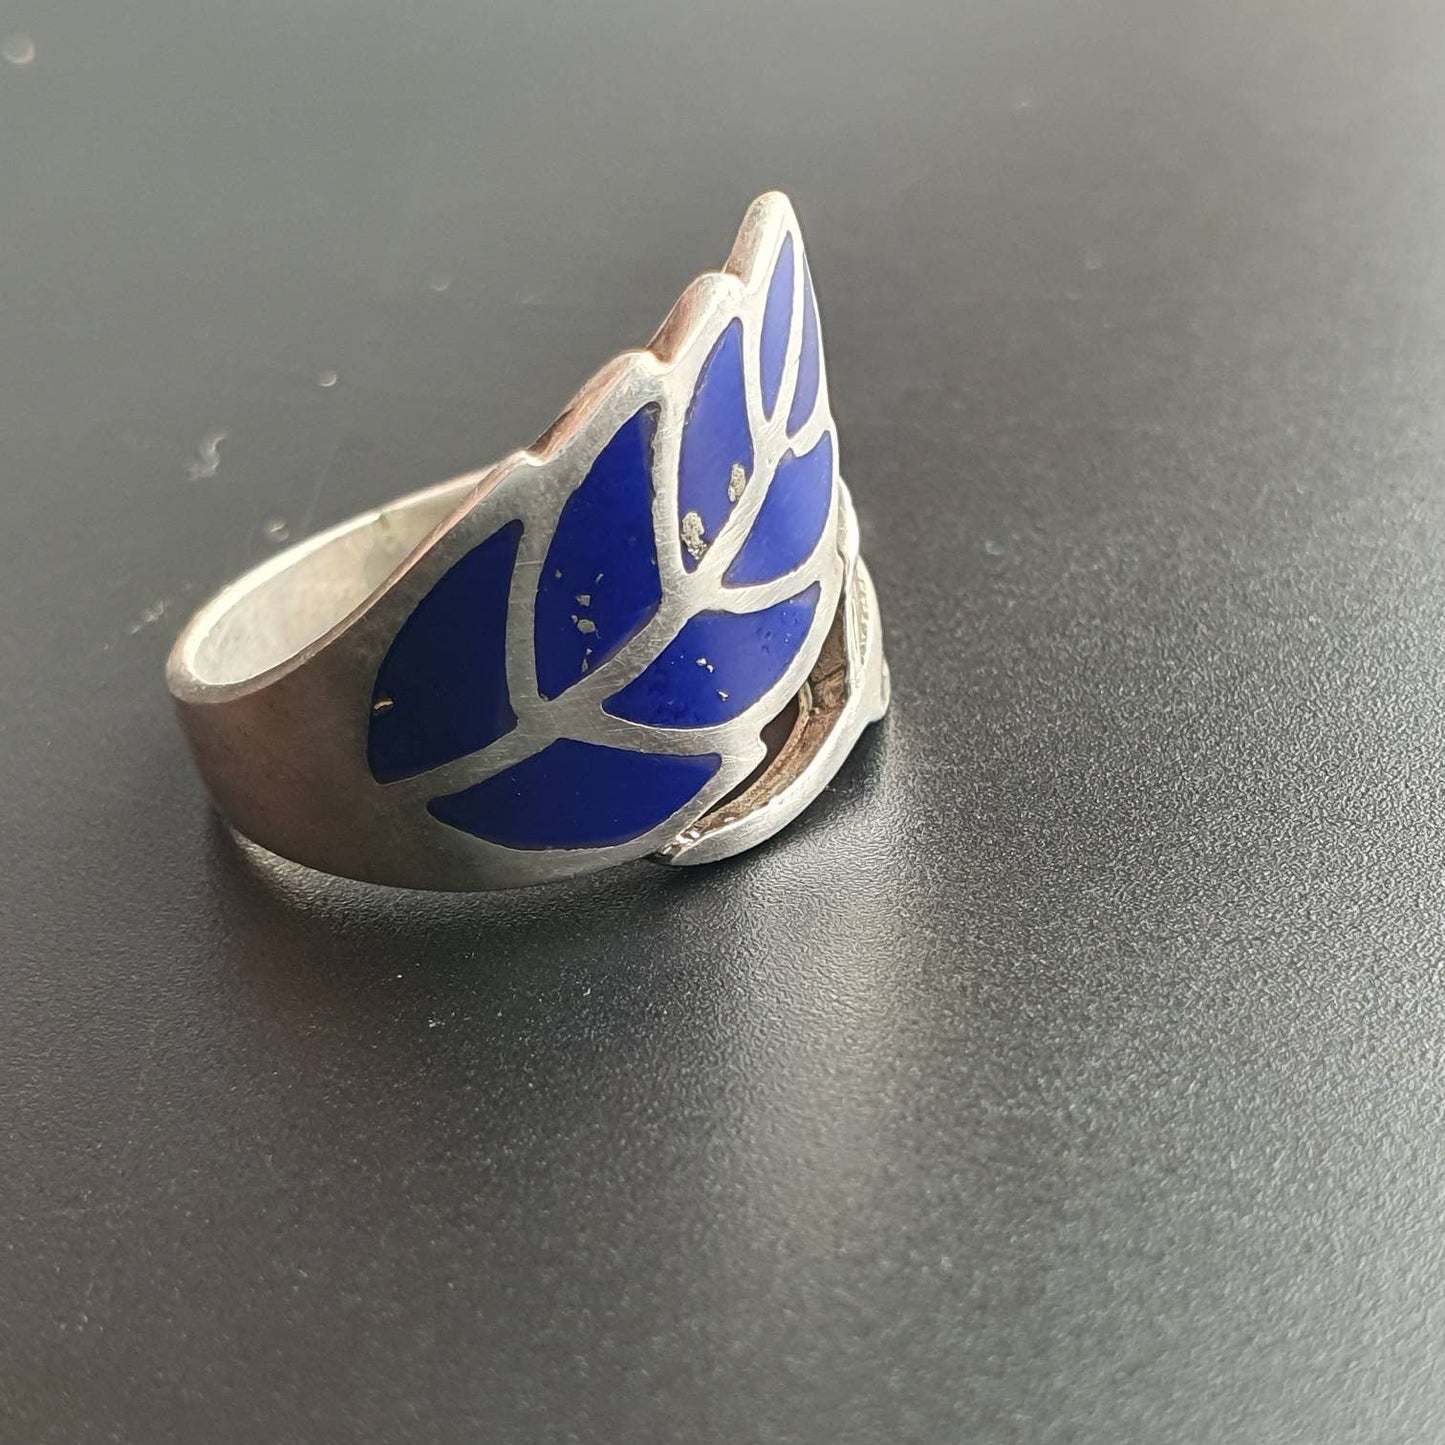 Ring, vintage handmade, jewelry, gifts, unique, jewelry, lapis lazuli, floral,flowers, leafs, sterling silver ring, statement, blue ring